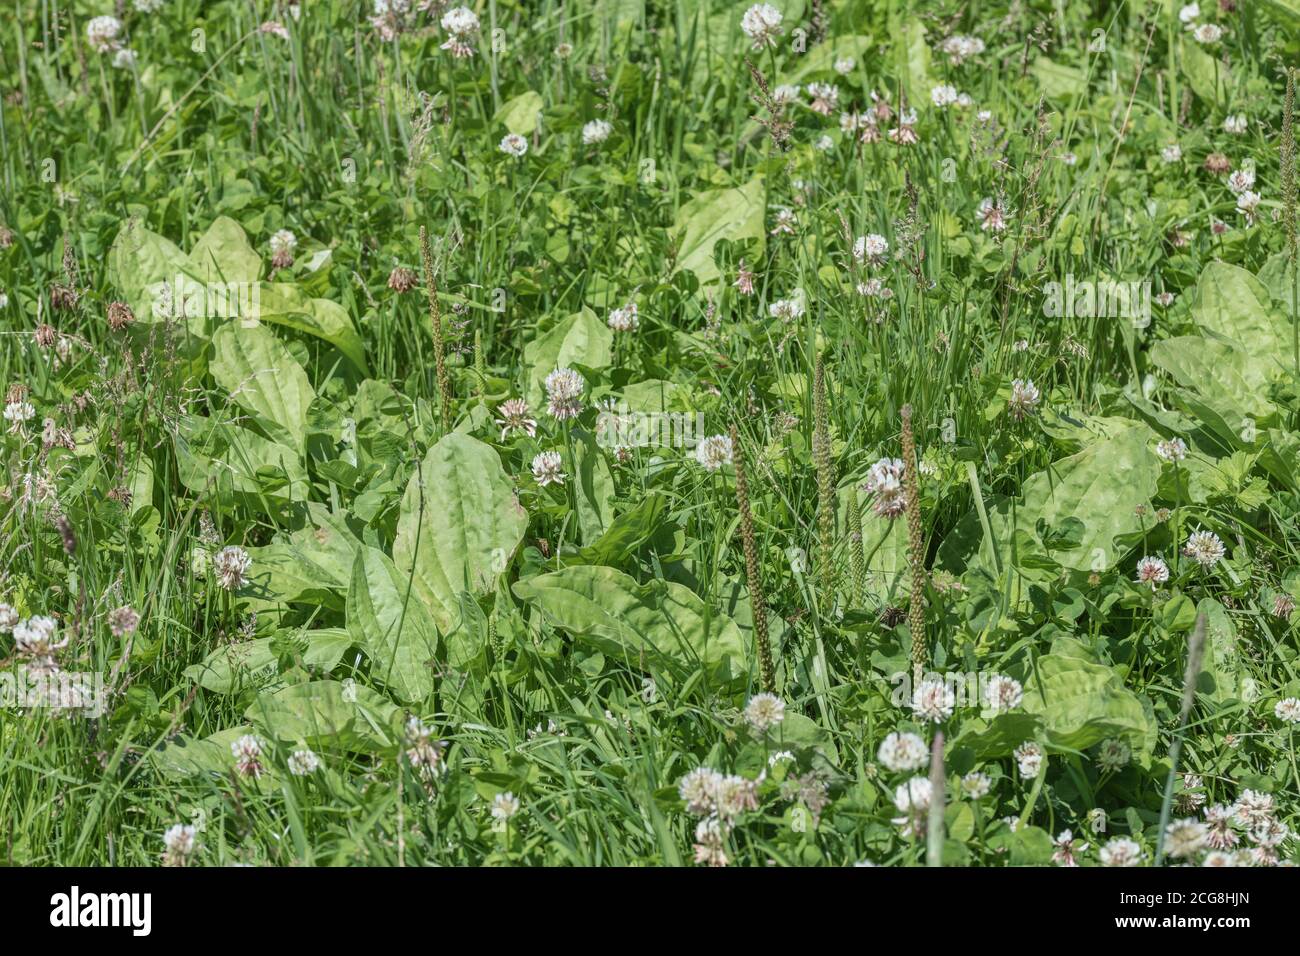 Leaves of Greater Plantain / Plantago major alongside flowering White Clover / Trifoilum repens. Plantain plant was once used in herbal medicine. Stock Photo